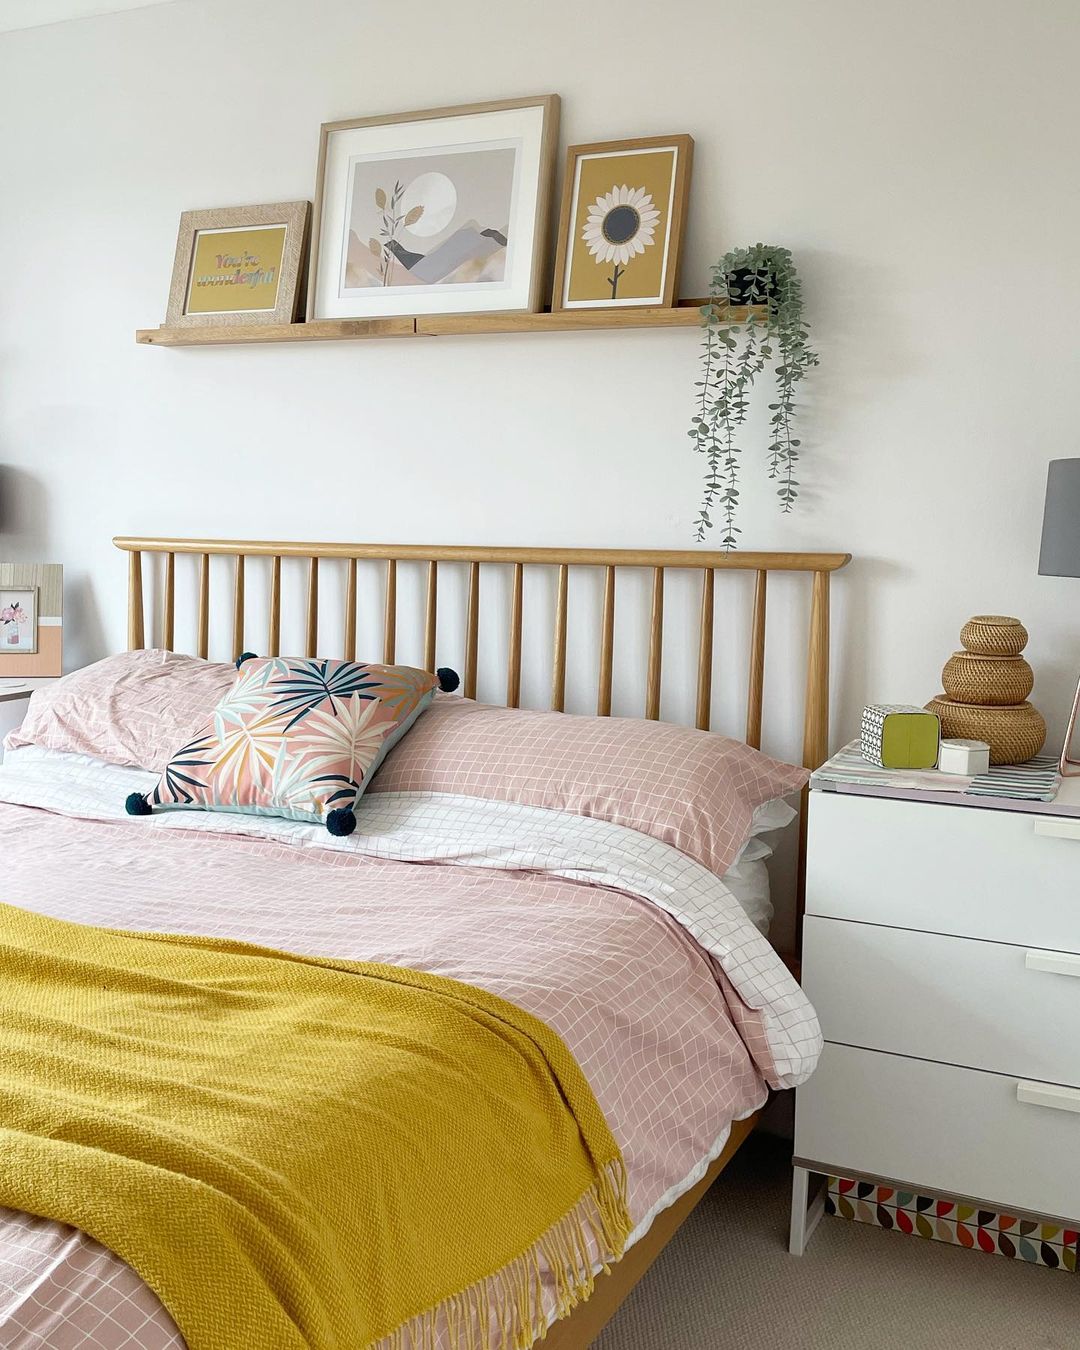 Vibrant Bedroom with Uplifting Picture Ledge Display